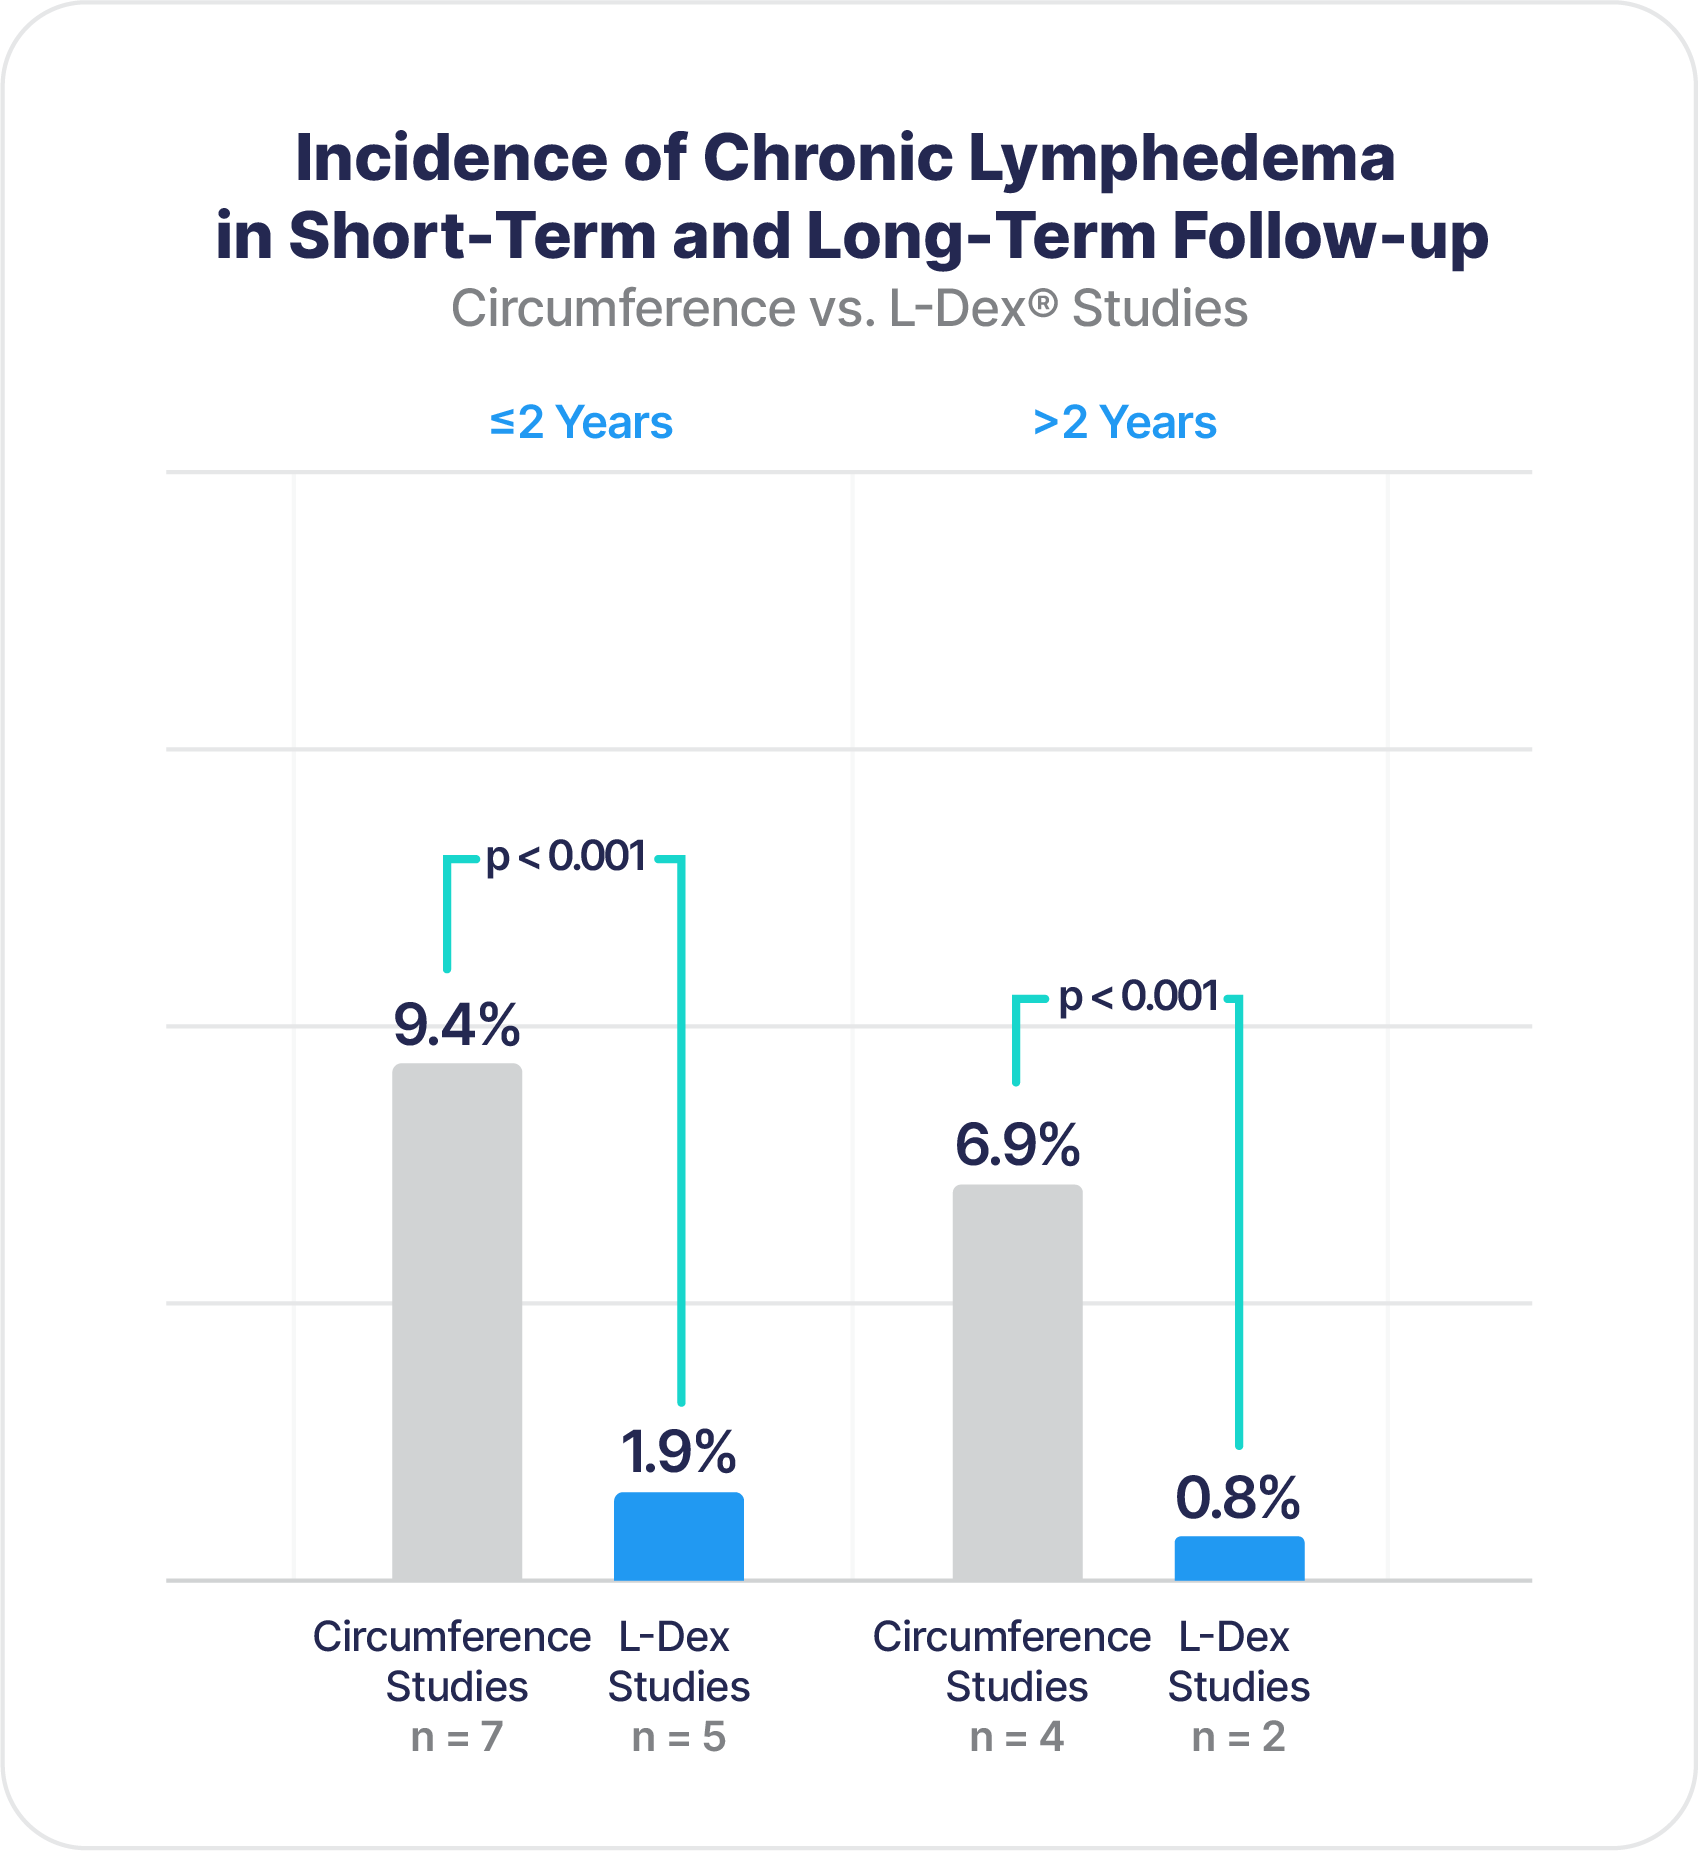 Statistically Lower Rates of Chronic Lymphedema in High-Risk Patients and Short-Term and Long-Term Follow-up